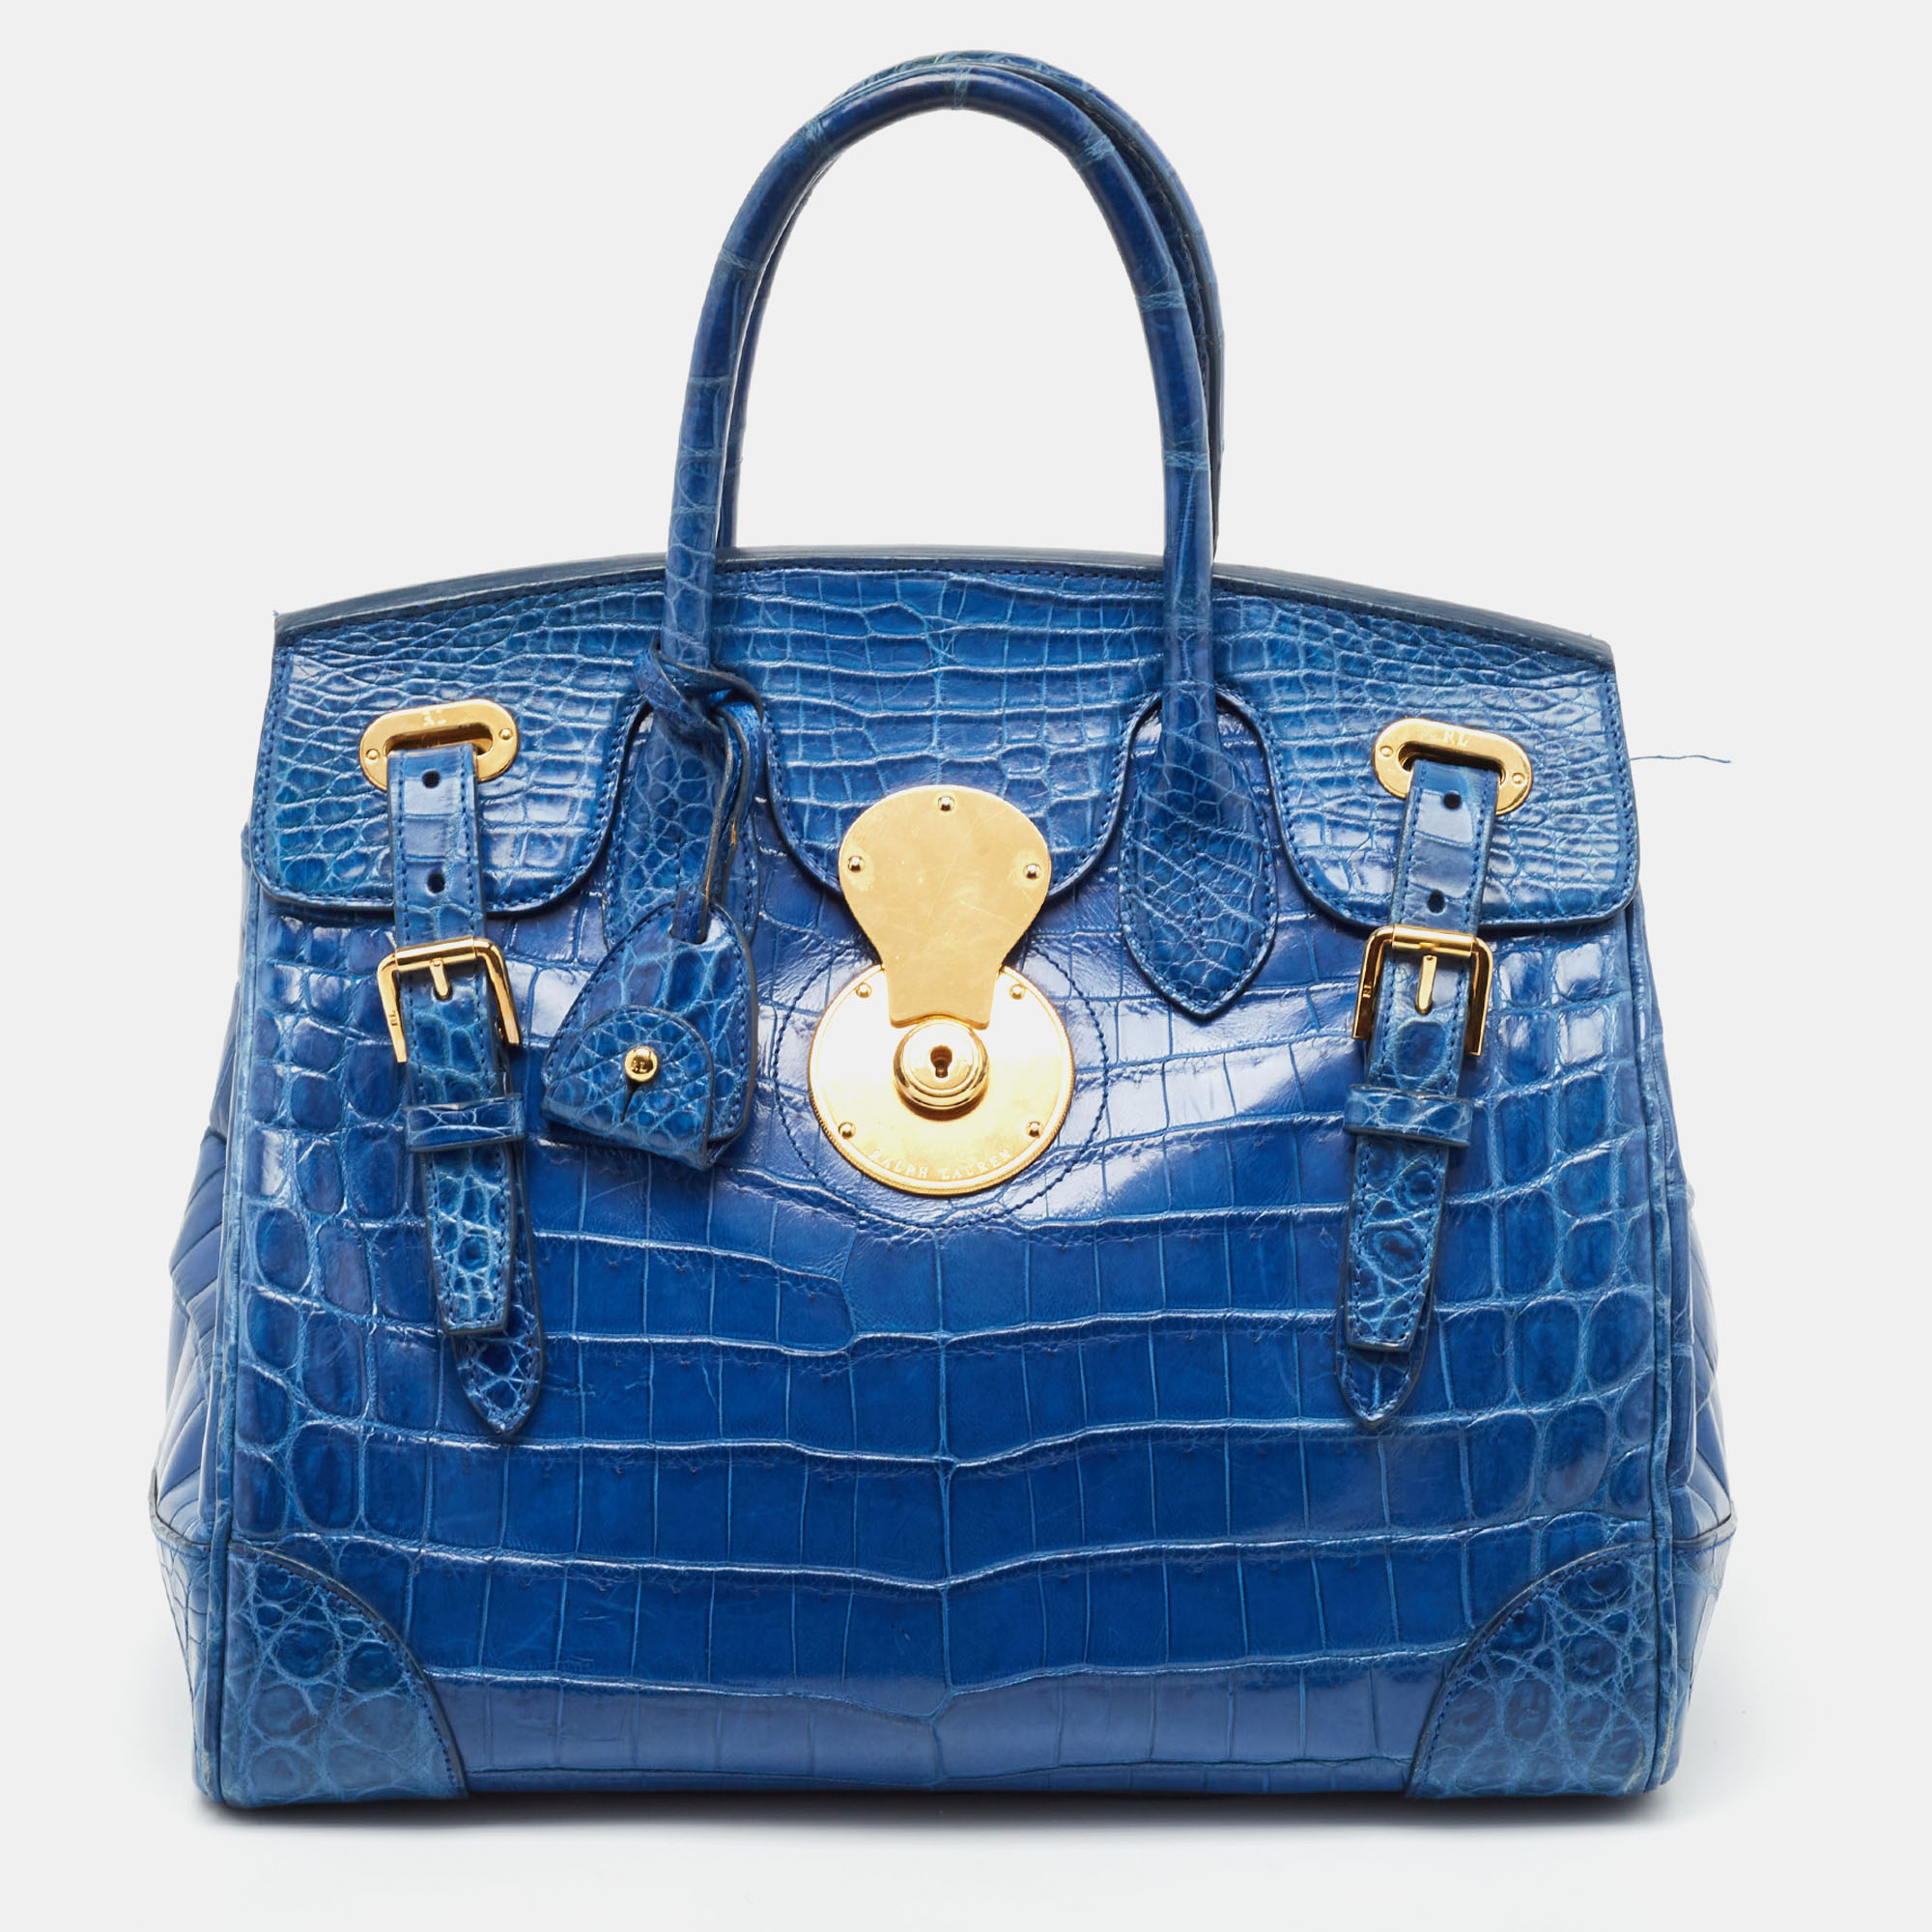 Classy in shape and design this Ricky 33 tote by Ralph Lauren will be a loved addition to your closet. It has been crafted from crocodile leather and styled minimally with gold tone hardware. It comes with two top handles and a leather lined interior.